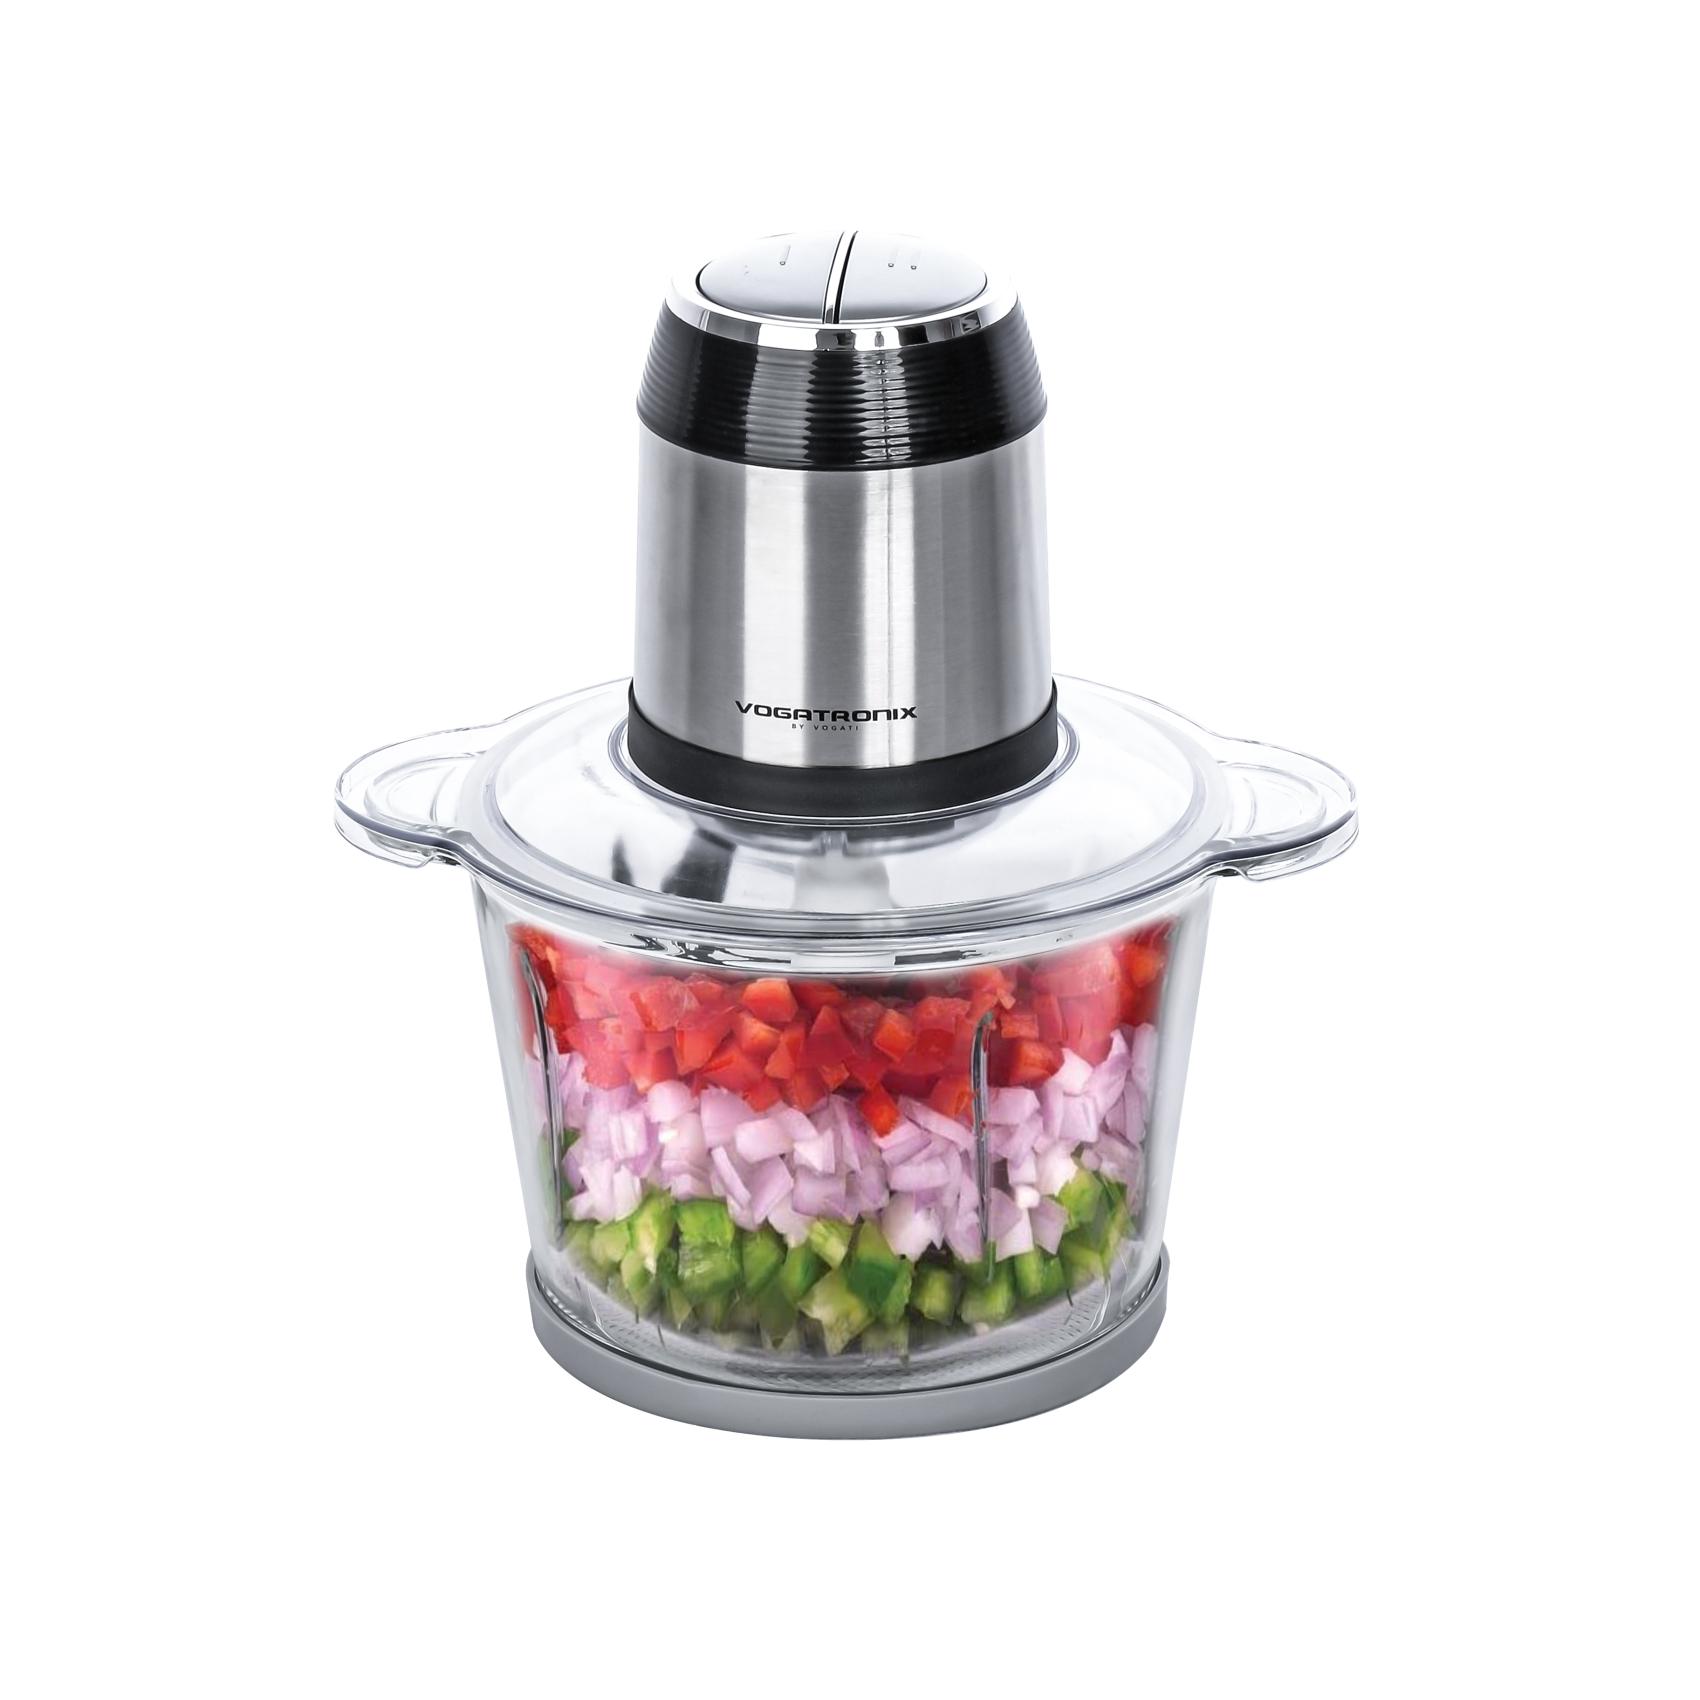 FOOD CHOPPER 500W | 3L LARGE GLASS BOWL | STAINLESS STEEL HOUSING | 6 BLADES | CHOPP - MINCE -CRUSH - GRIND | 2 SPEED | EXTRA GARLIC PEELER | OVER HEAT PROTCTION VE-193